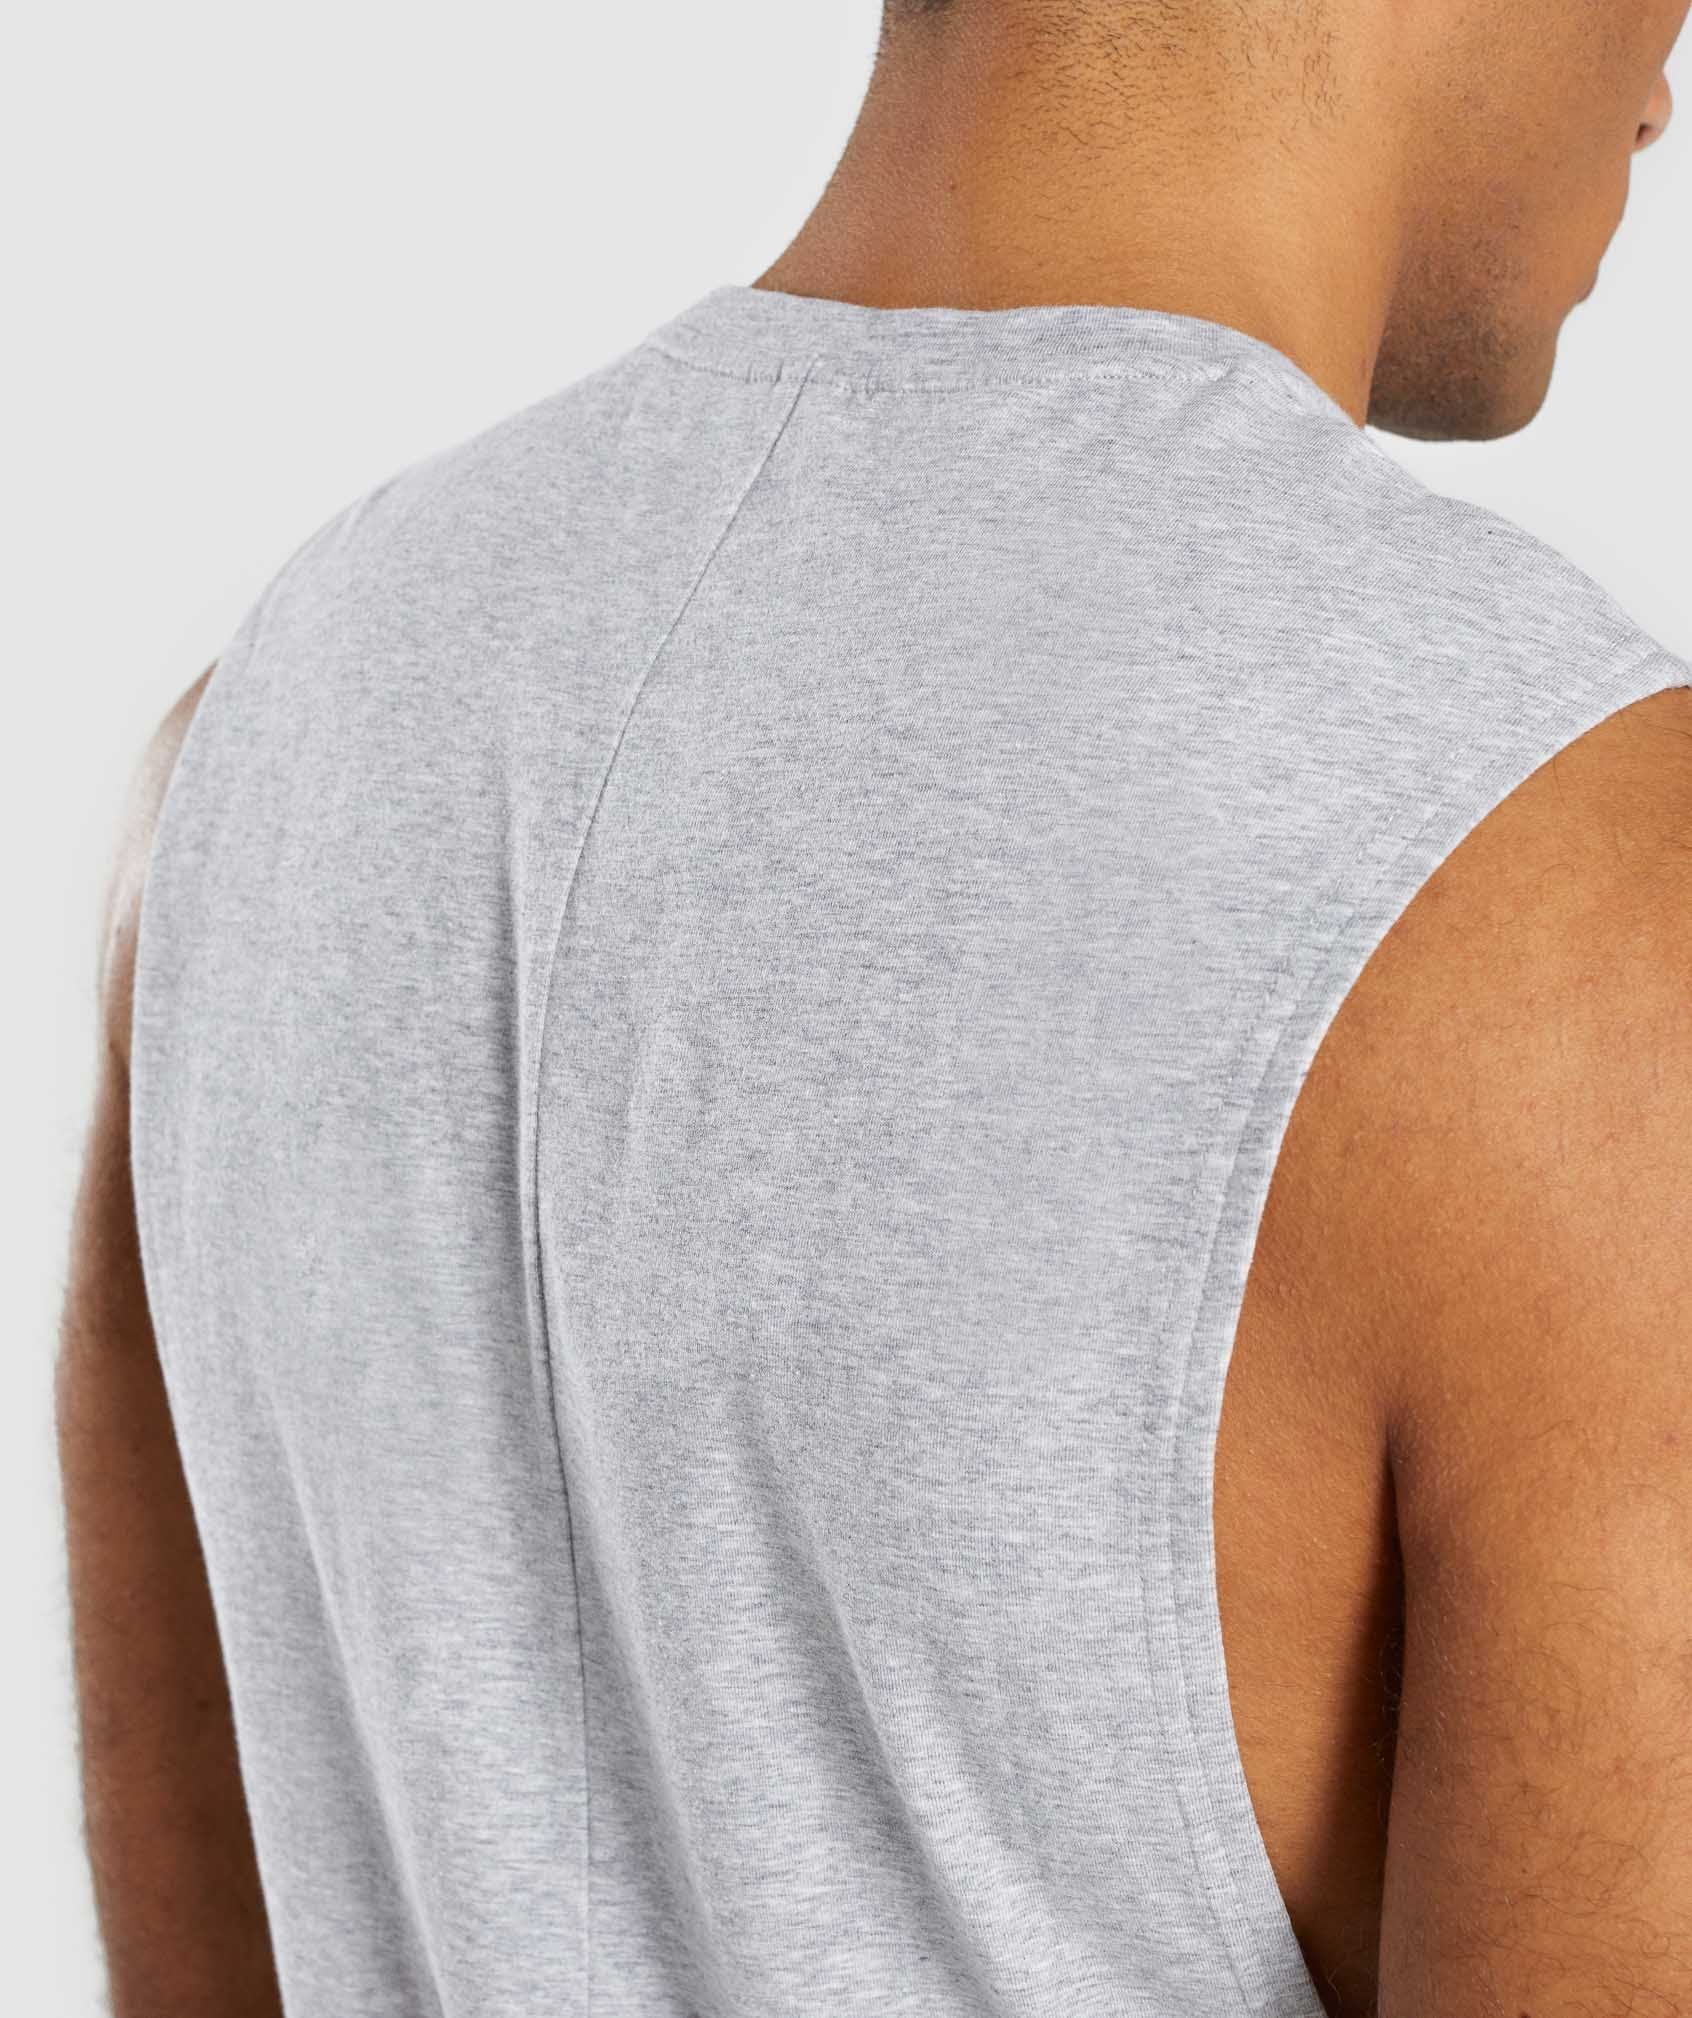 Bold Graphic Drop Armhole Tank in Grey - view 6